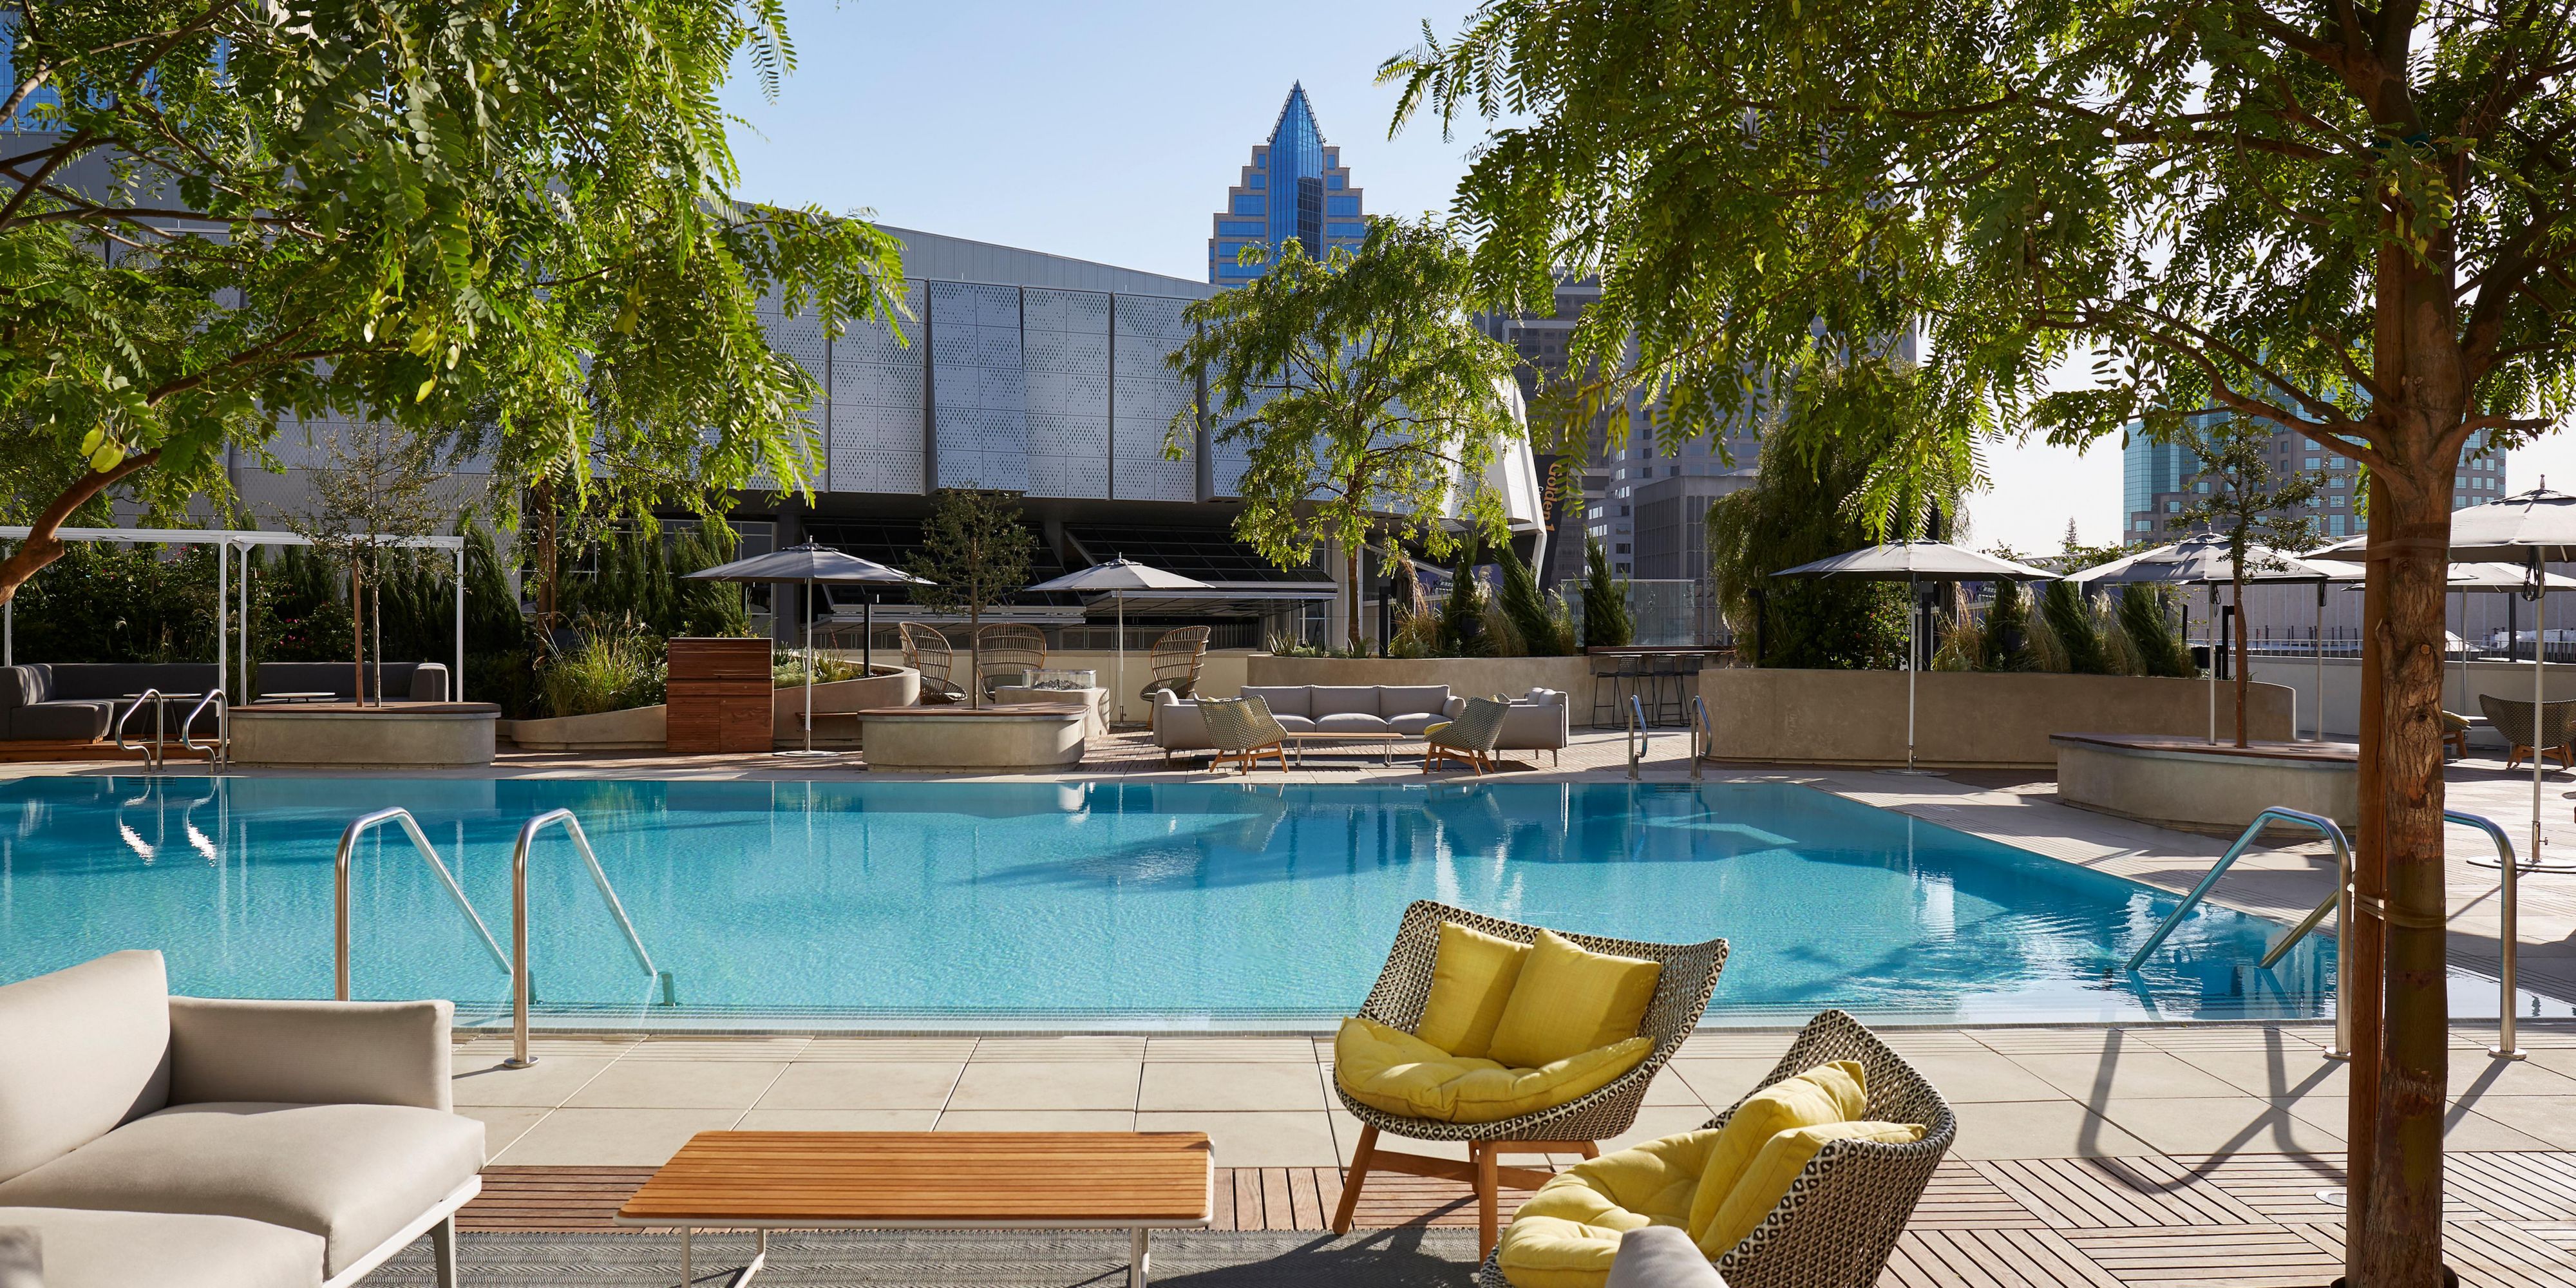 Rising three stories above the center of Sacramento, Revival’s indoor-outdoor social space feeds off the energy that filters up from Downtown Commons and Golden 1 Center below. Seasonal programming around the lush pool ensures there’s always something going on at Revival.